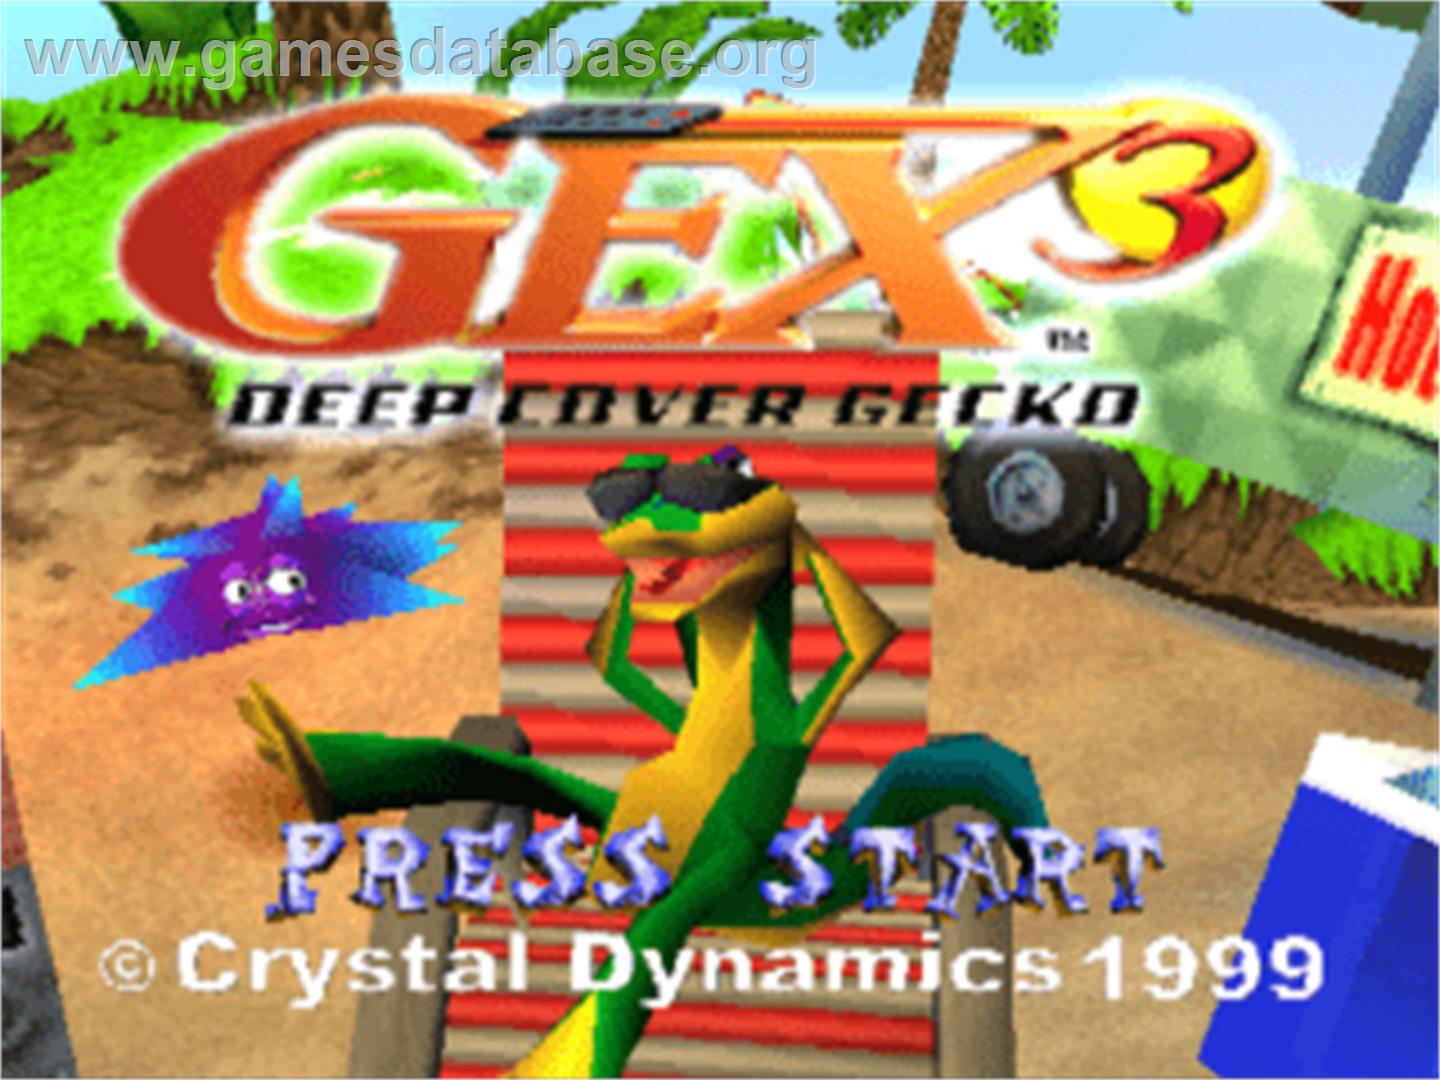 Gex 3: Deep Cover Gecko - Sony Playstation - Artwork - Title Screen